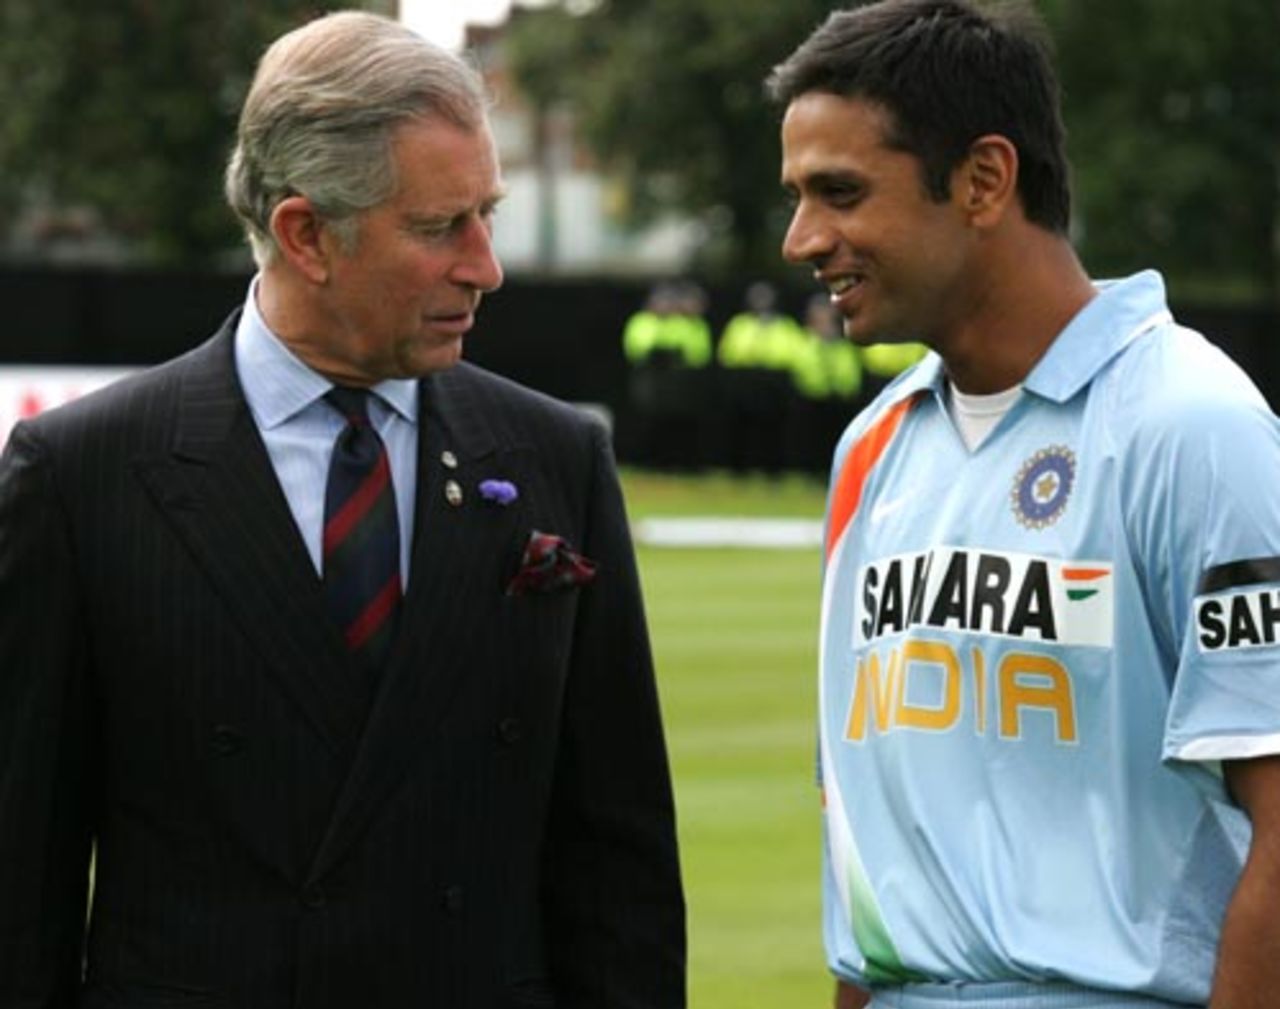 Rahul Dravid has a conversation with the Prince of Wales, Glasgow, July 3, 2007